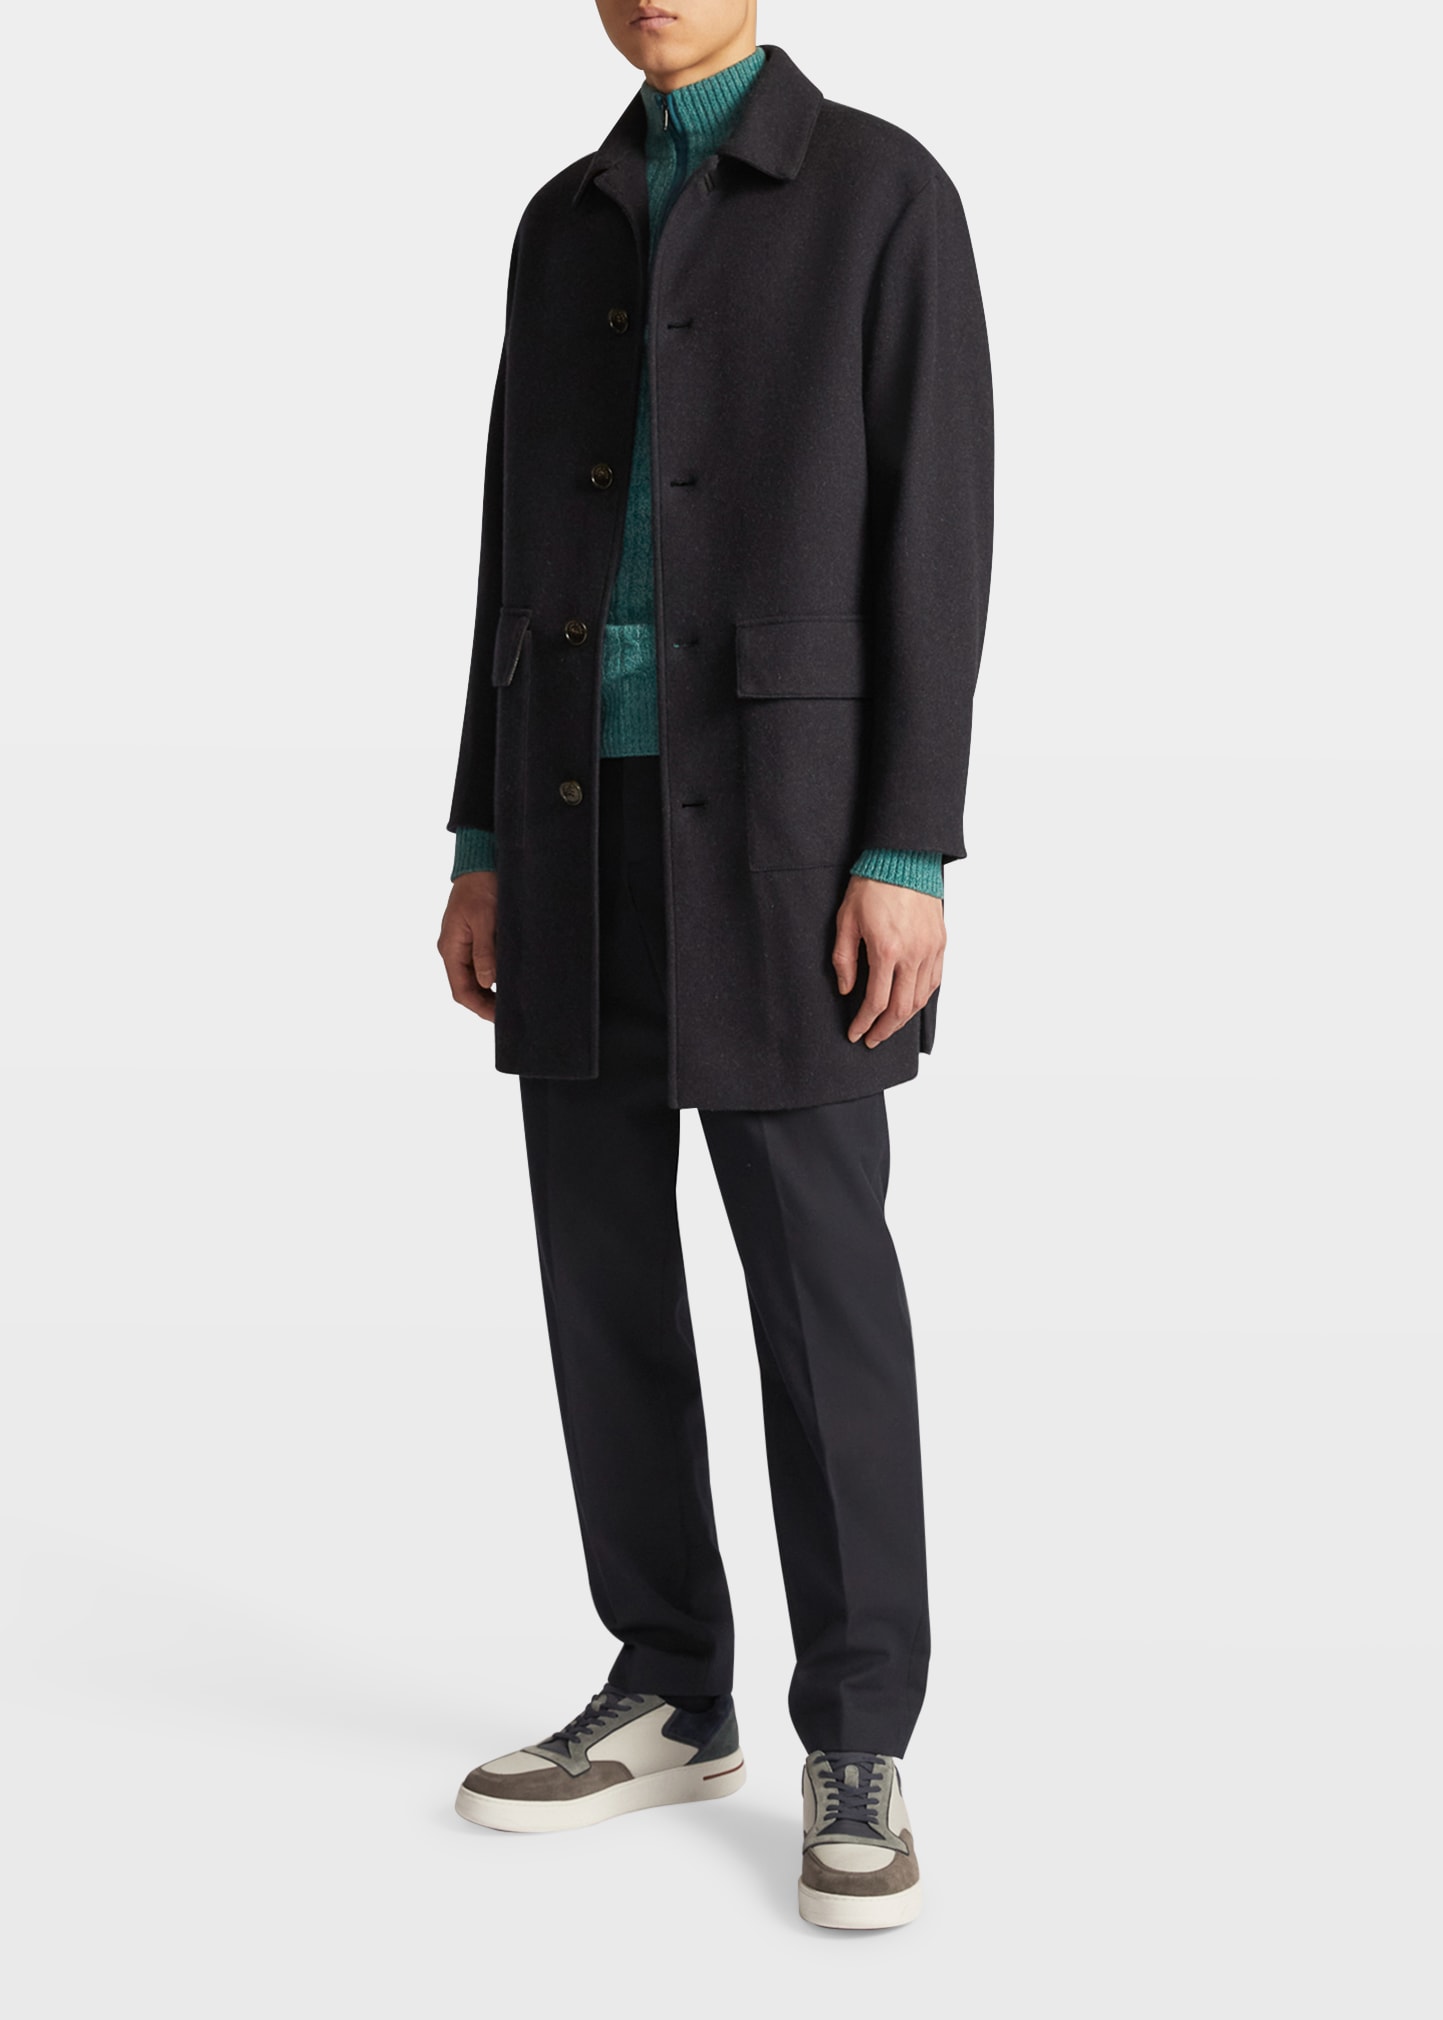 Men's Carnaby Cashmere Coat